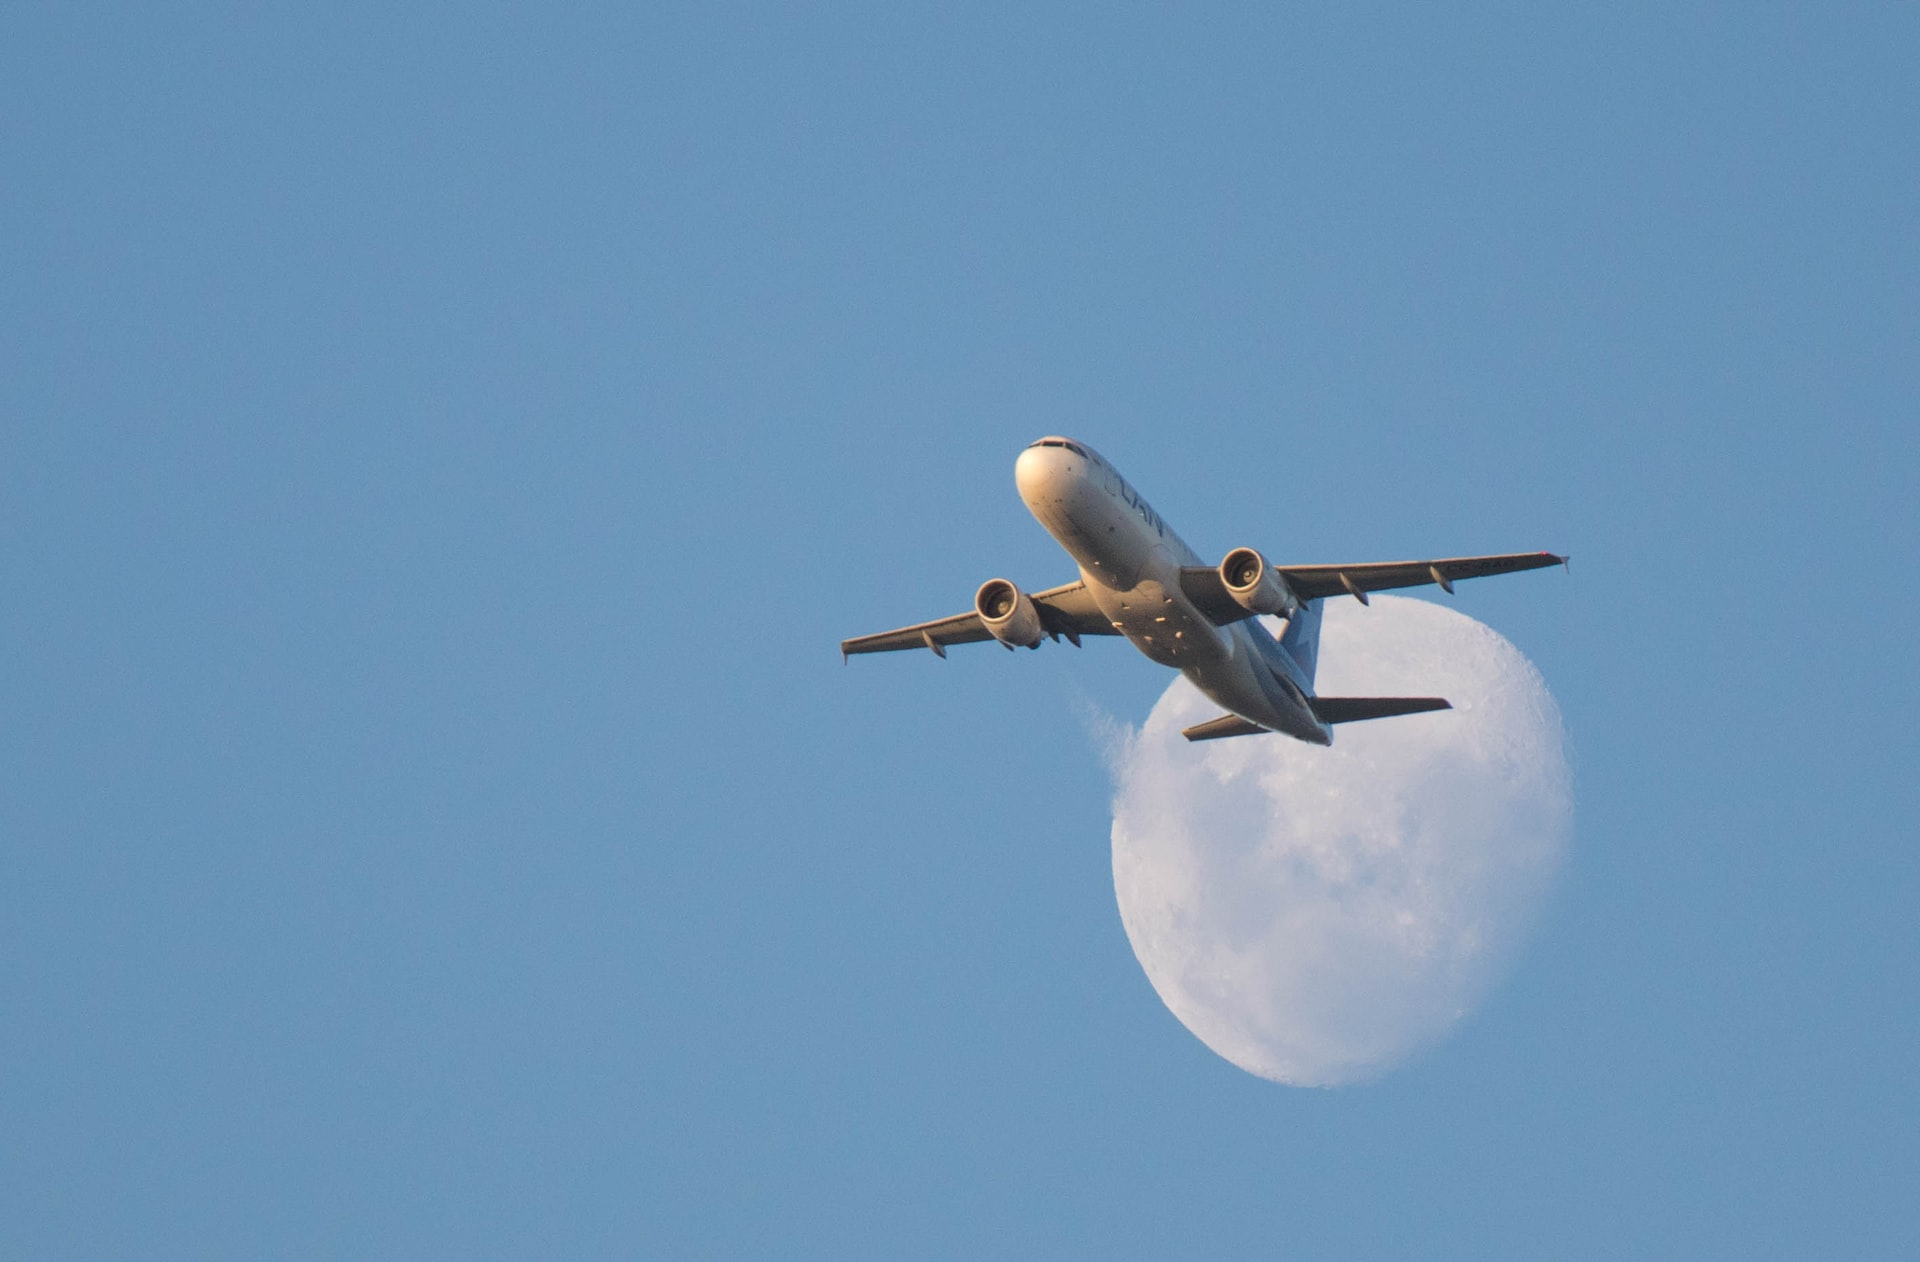 A standard commercial aircraft taking off with moon in the background.